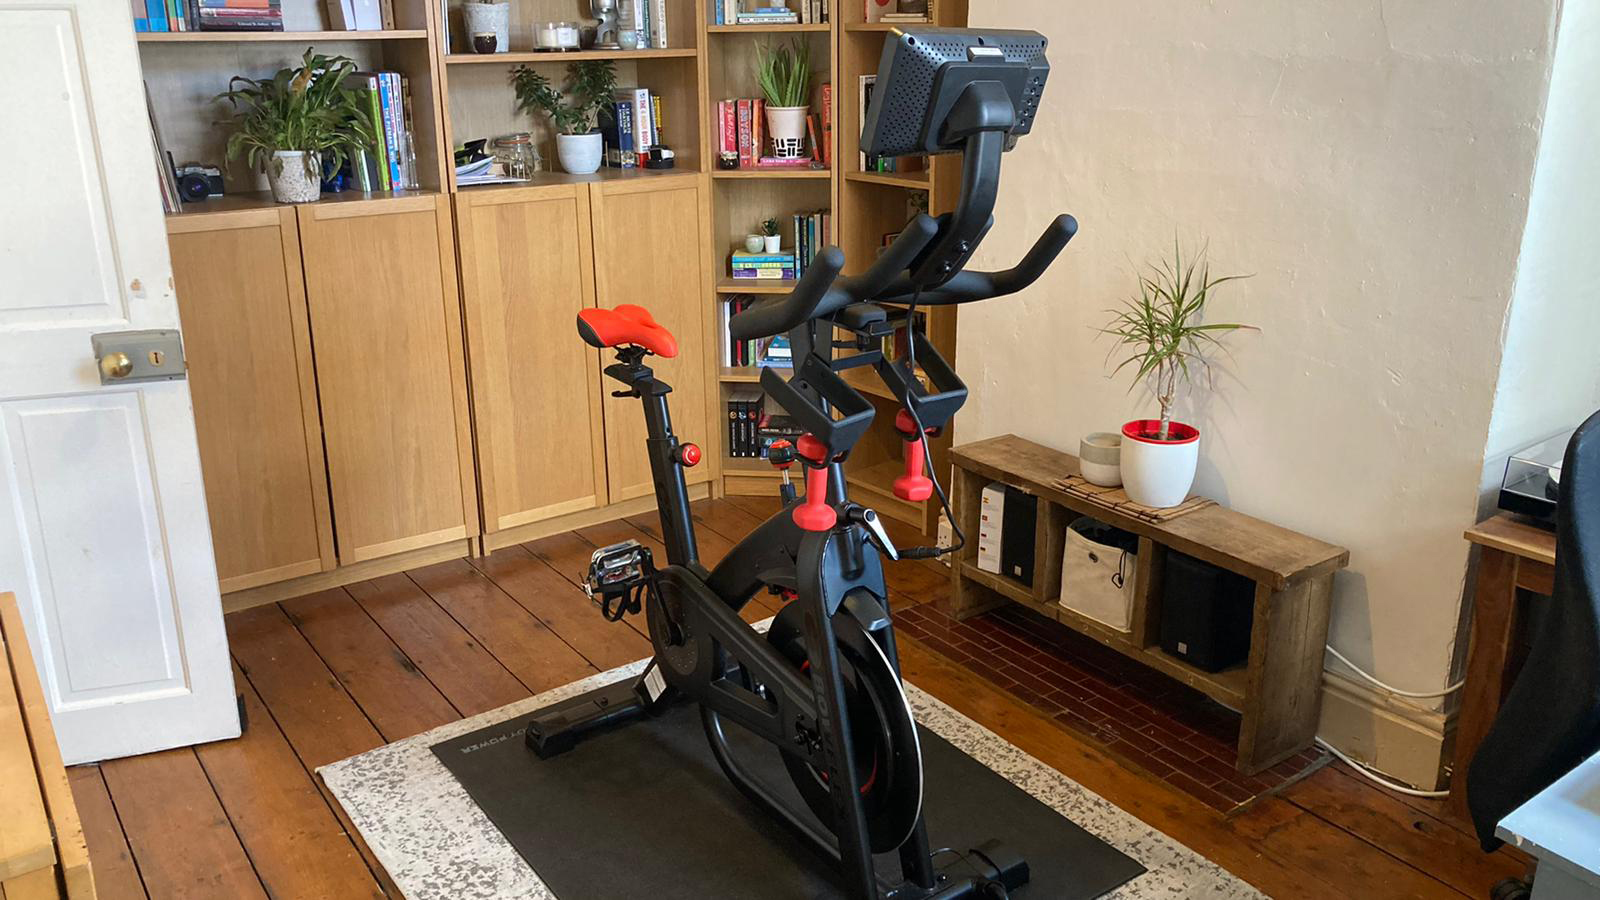 Bowflex C7 bike being tested at home